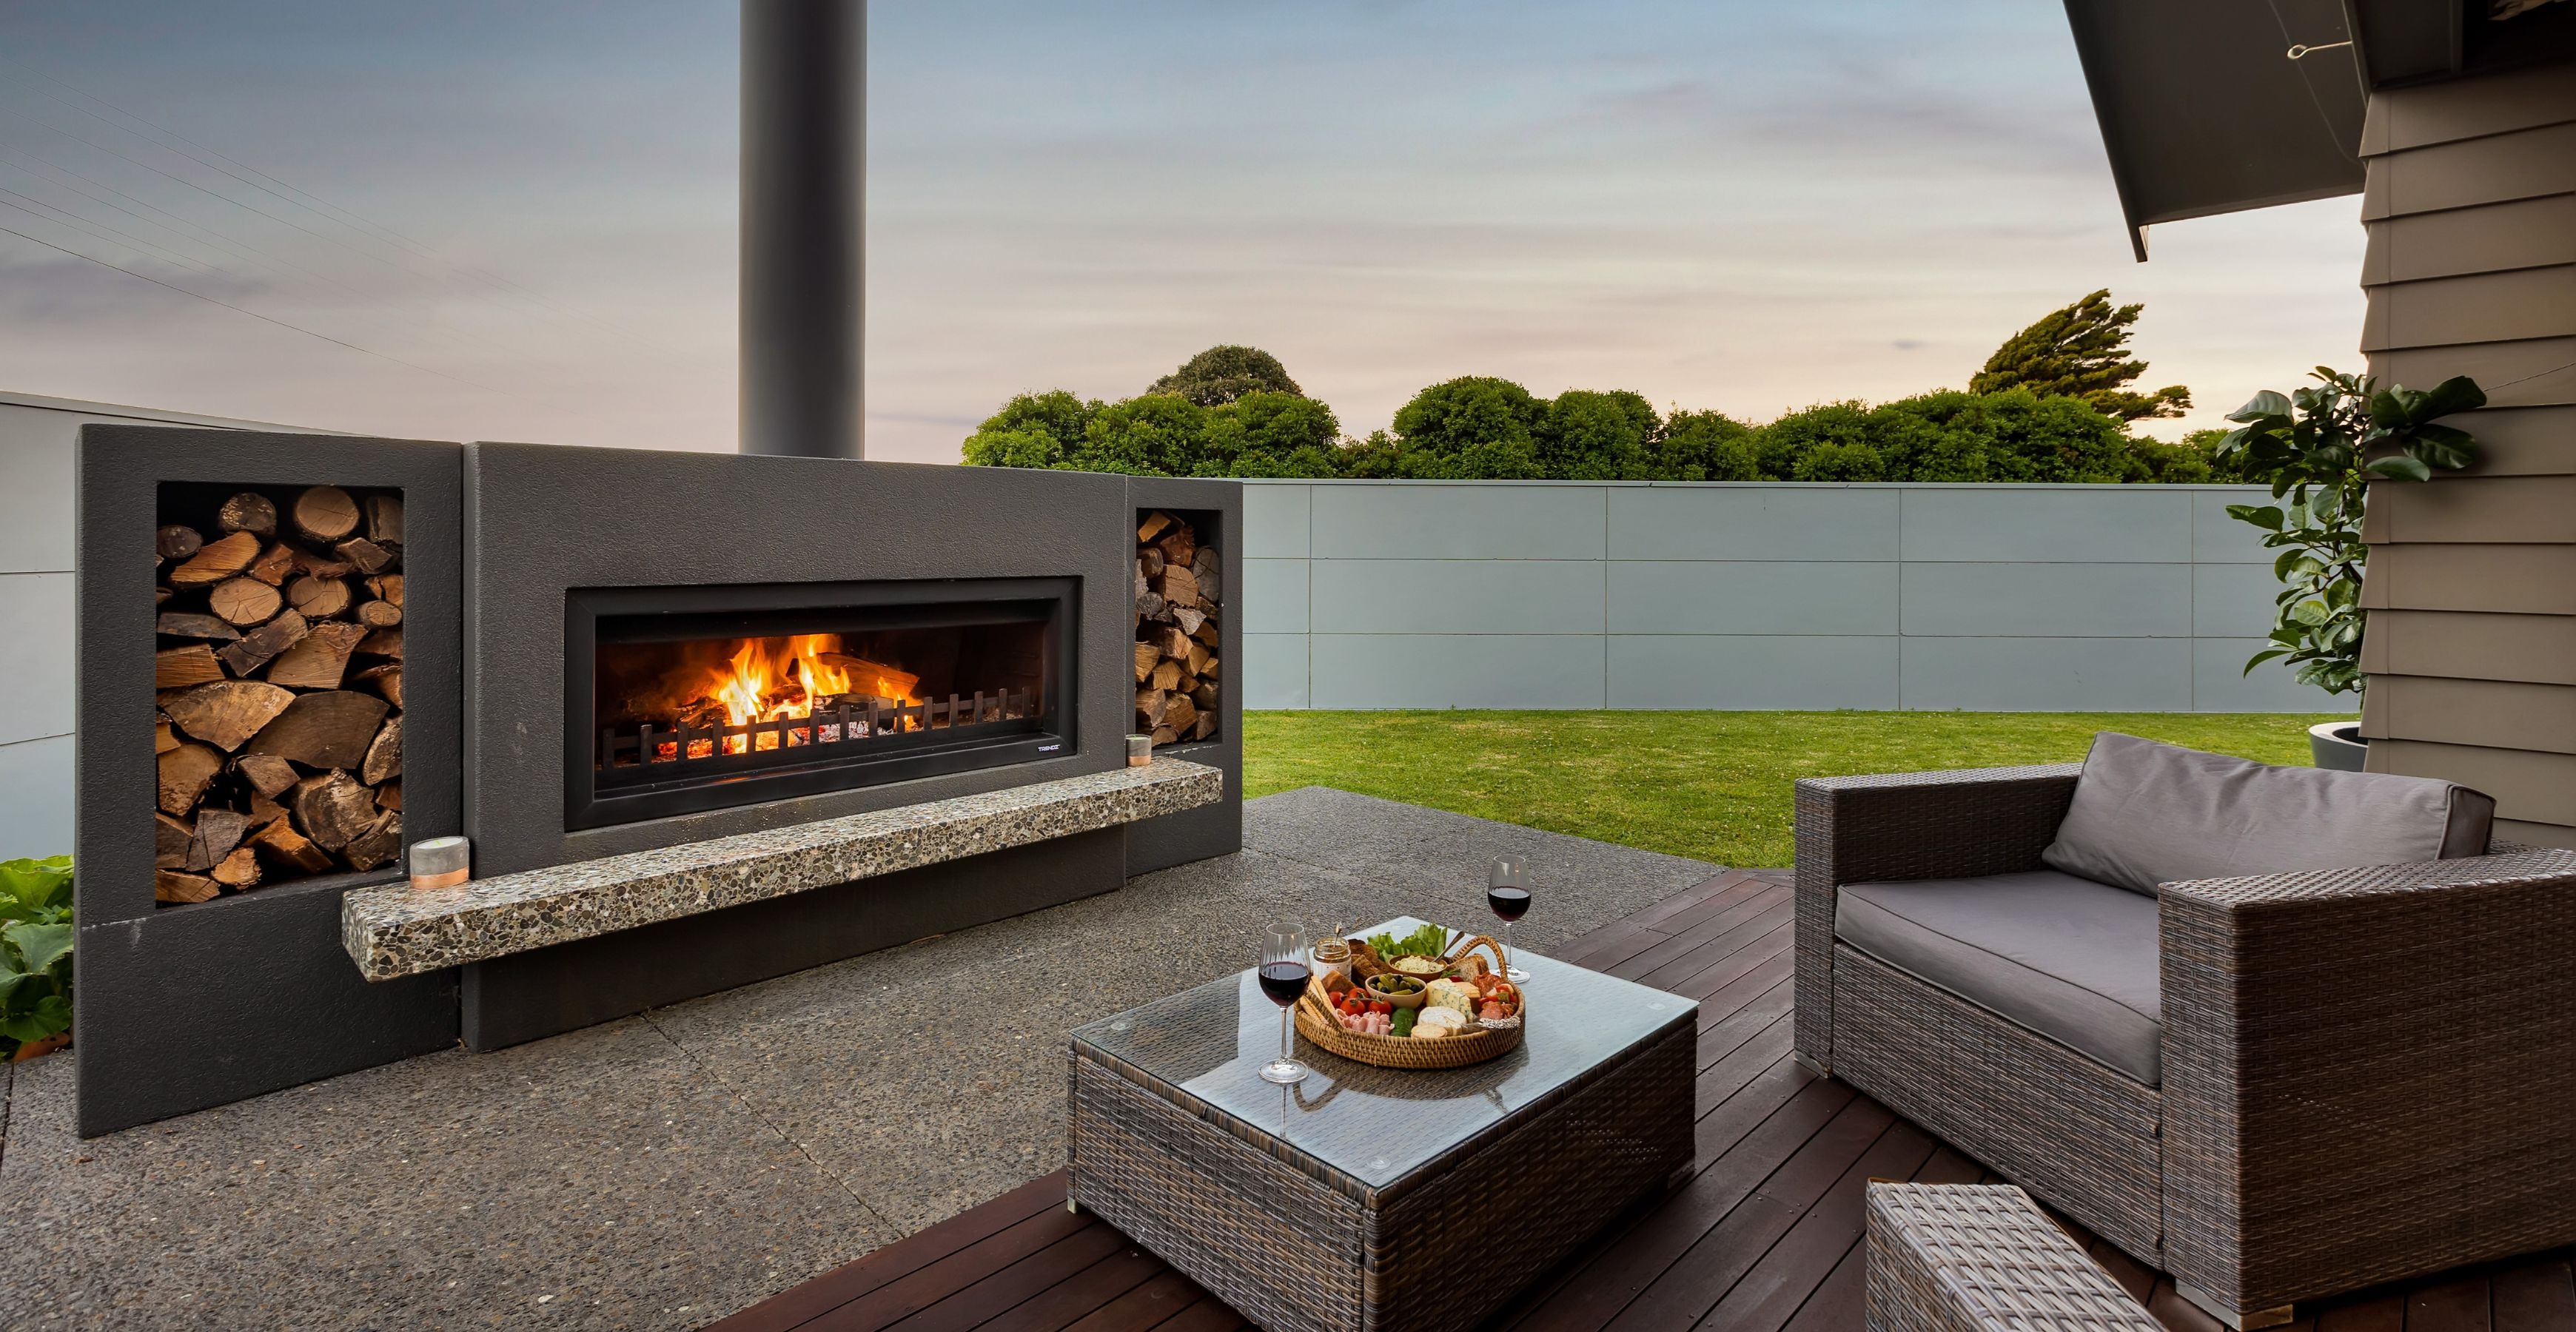 How much does an outdoor fireplace cost?